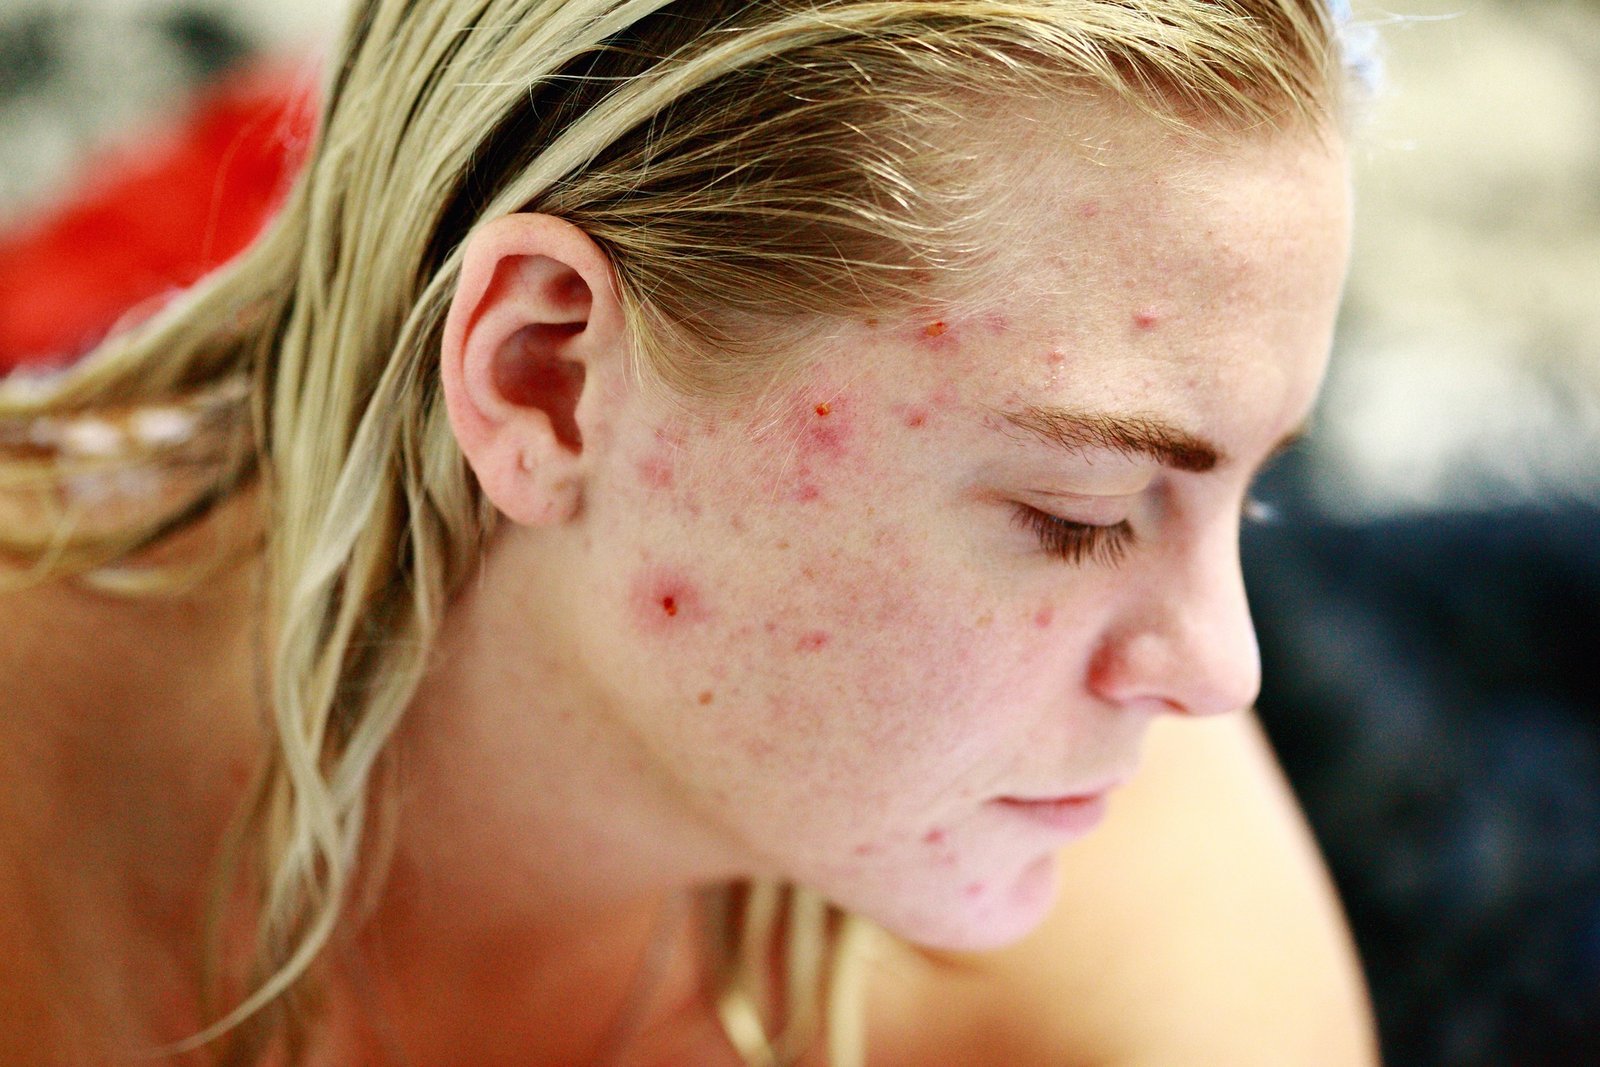 a woman with blonde hair and red spots on her face